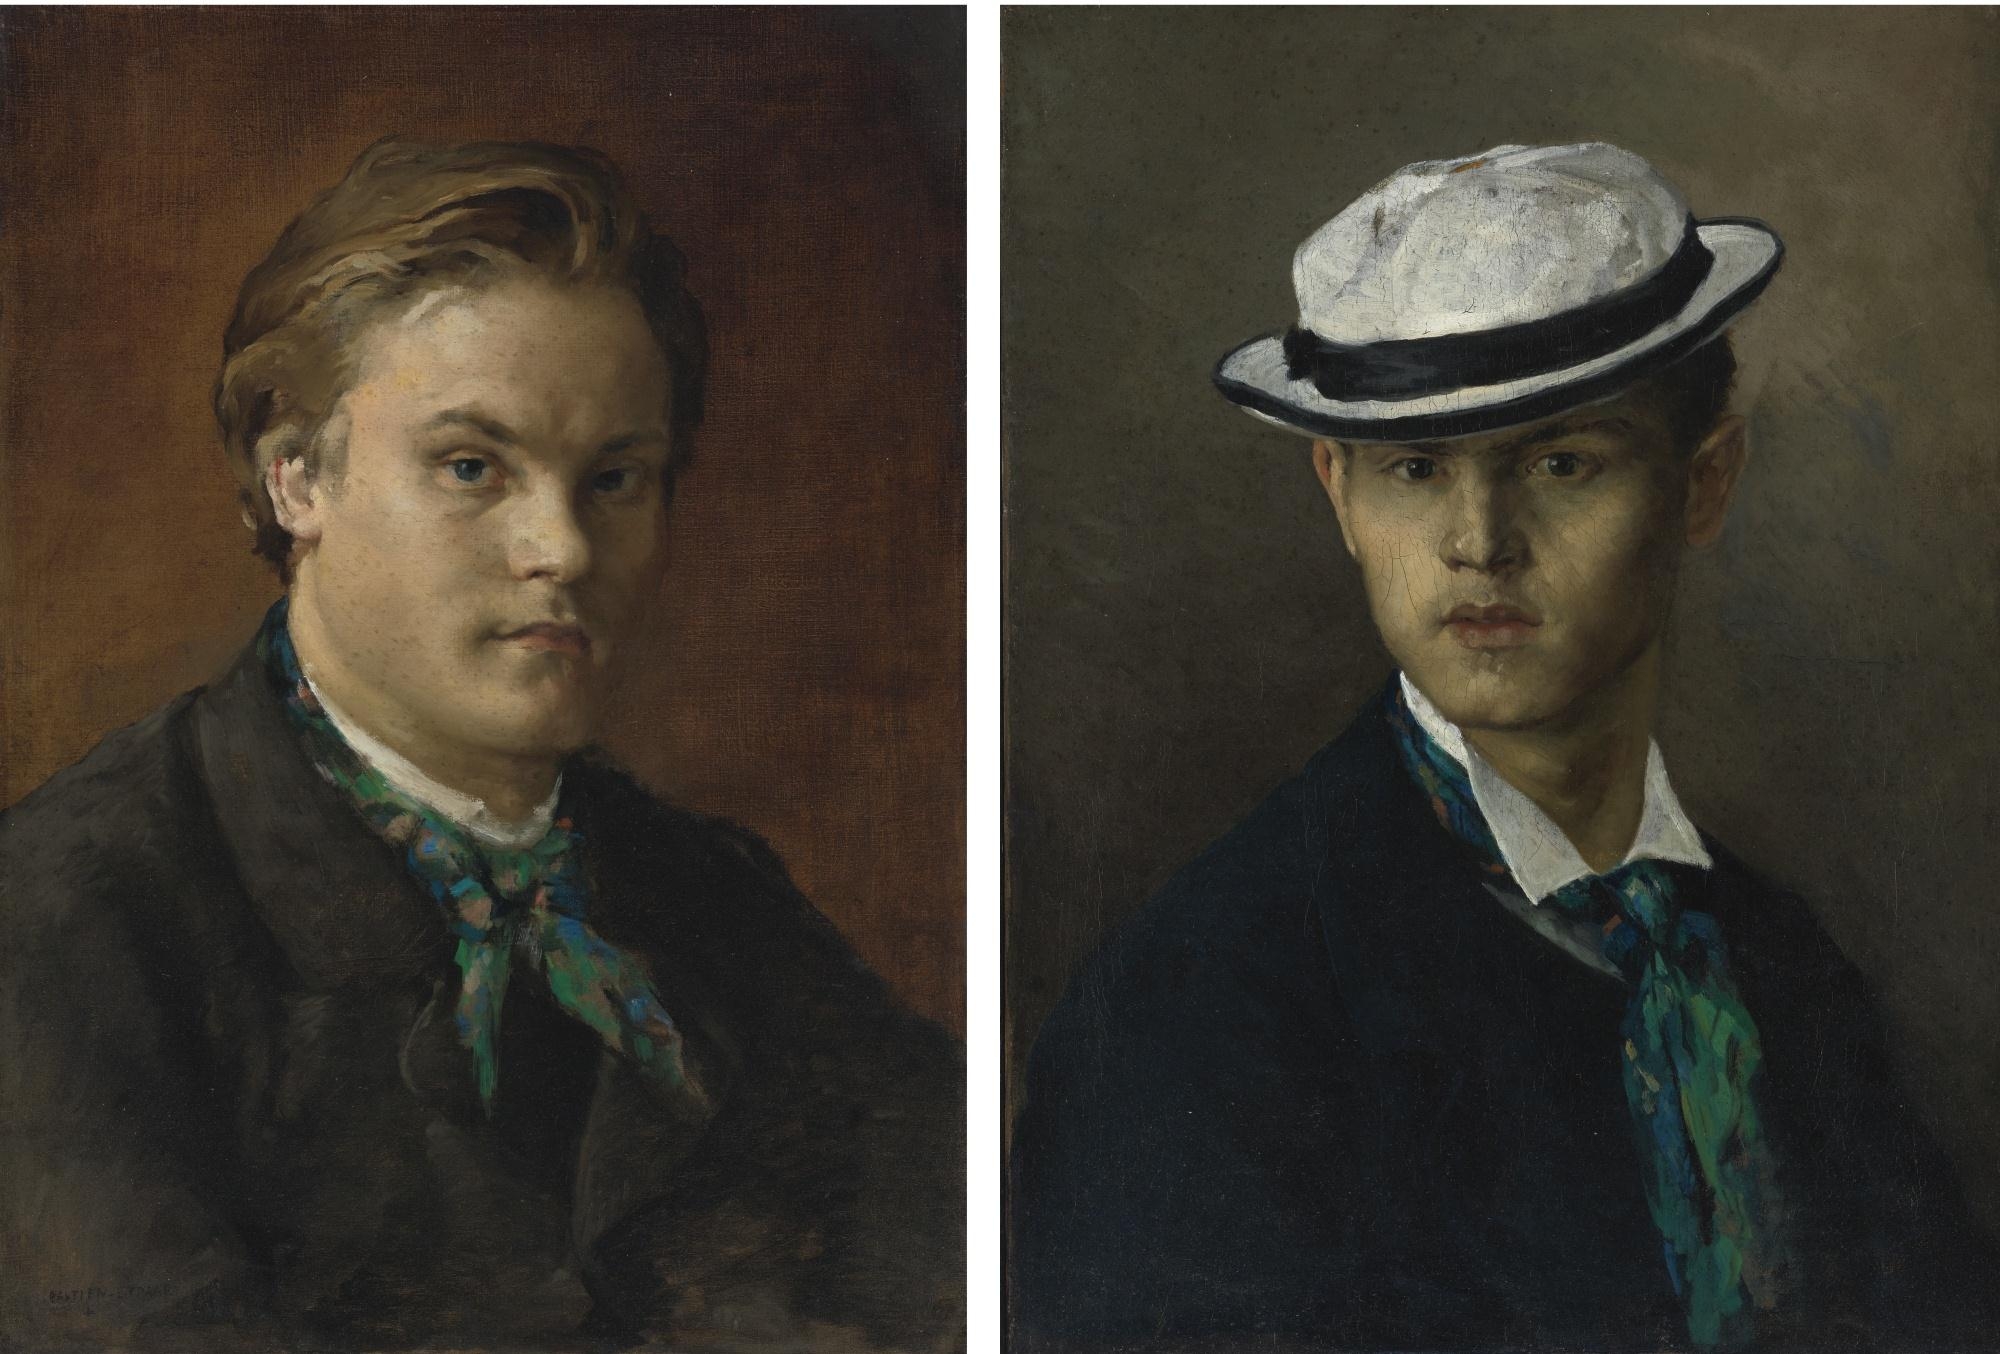 PORTRAIT OF EMILE BASTIEN-LEPAGE AND PORTRAIT OF A MAN WITH A BOATER... by Jules Bastien-Lepage